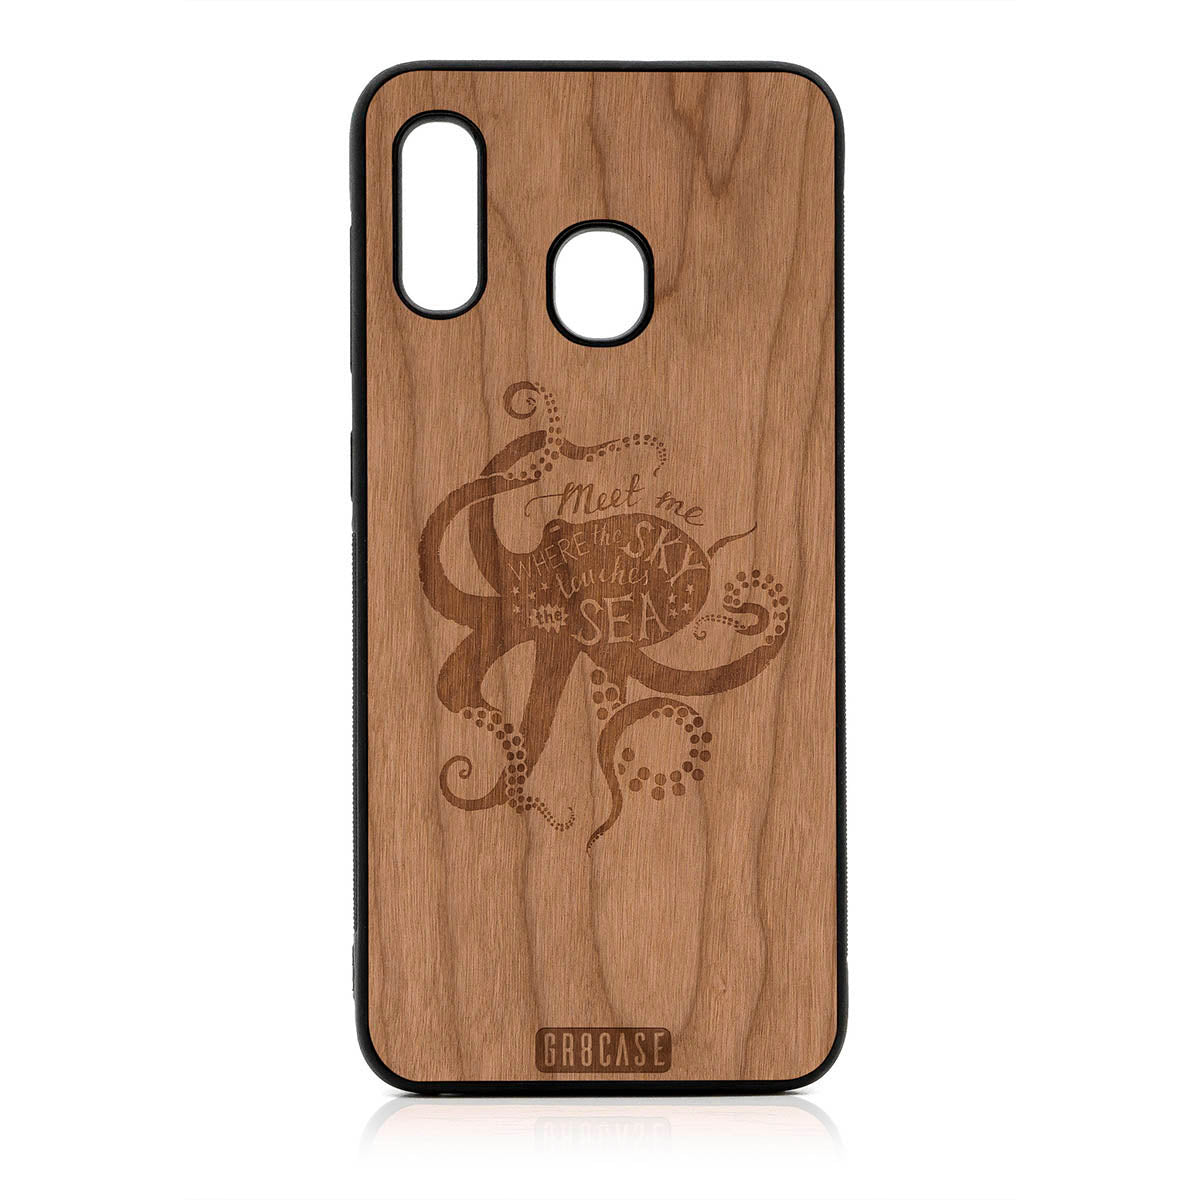 Meet Me Where The Sky Touches The Sea (Octopus) Design Wood Case For Samsung Galaxy A20